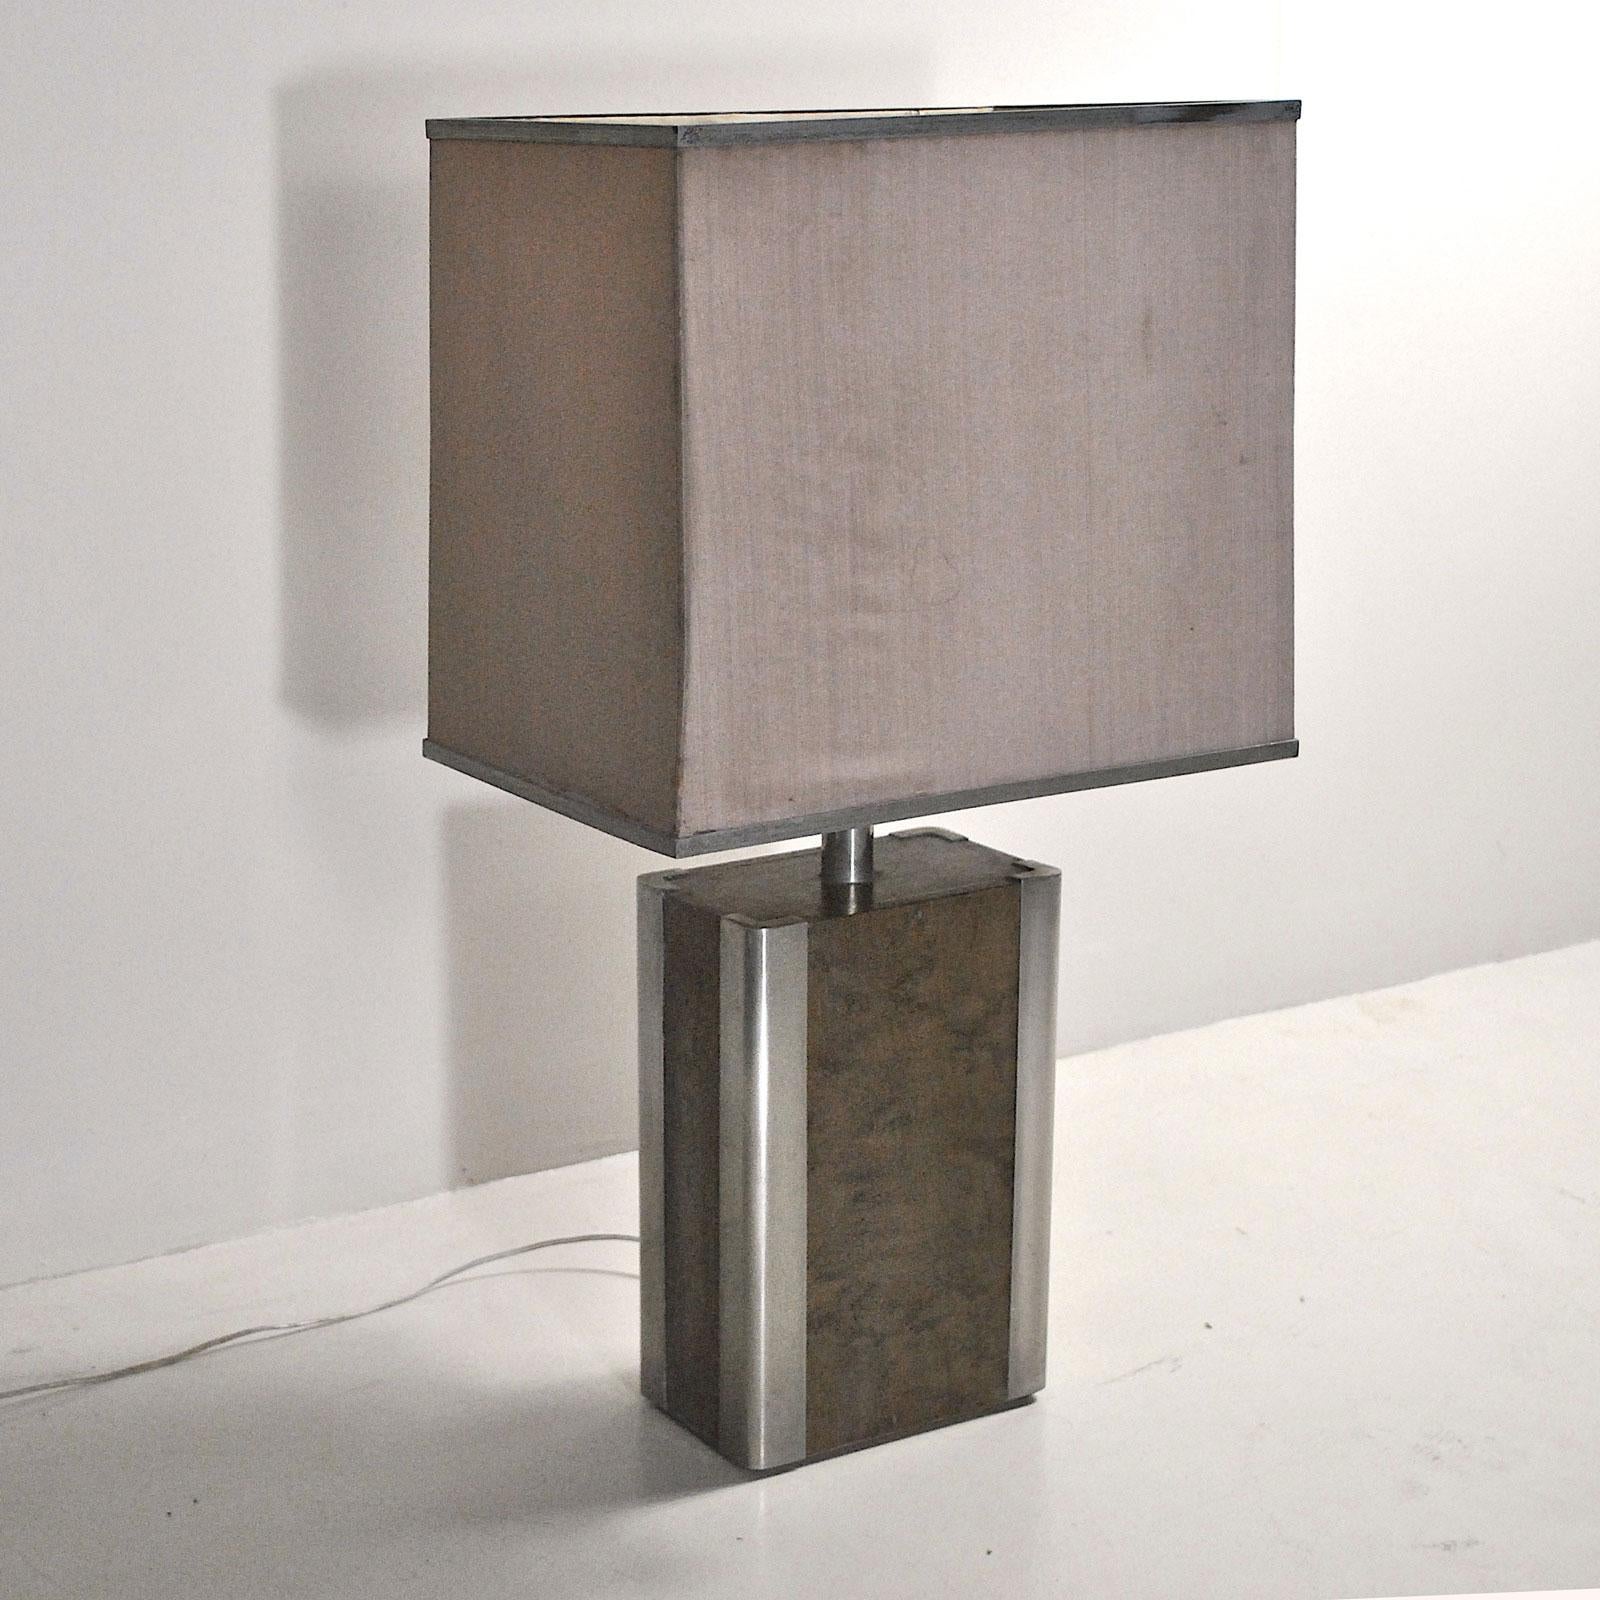 Italian Midcentury Table Lamp in Drawn Wood and Steel from the 1970s For Sale 2